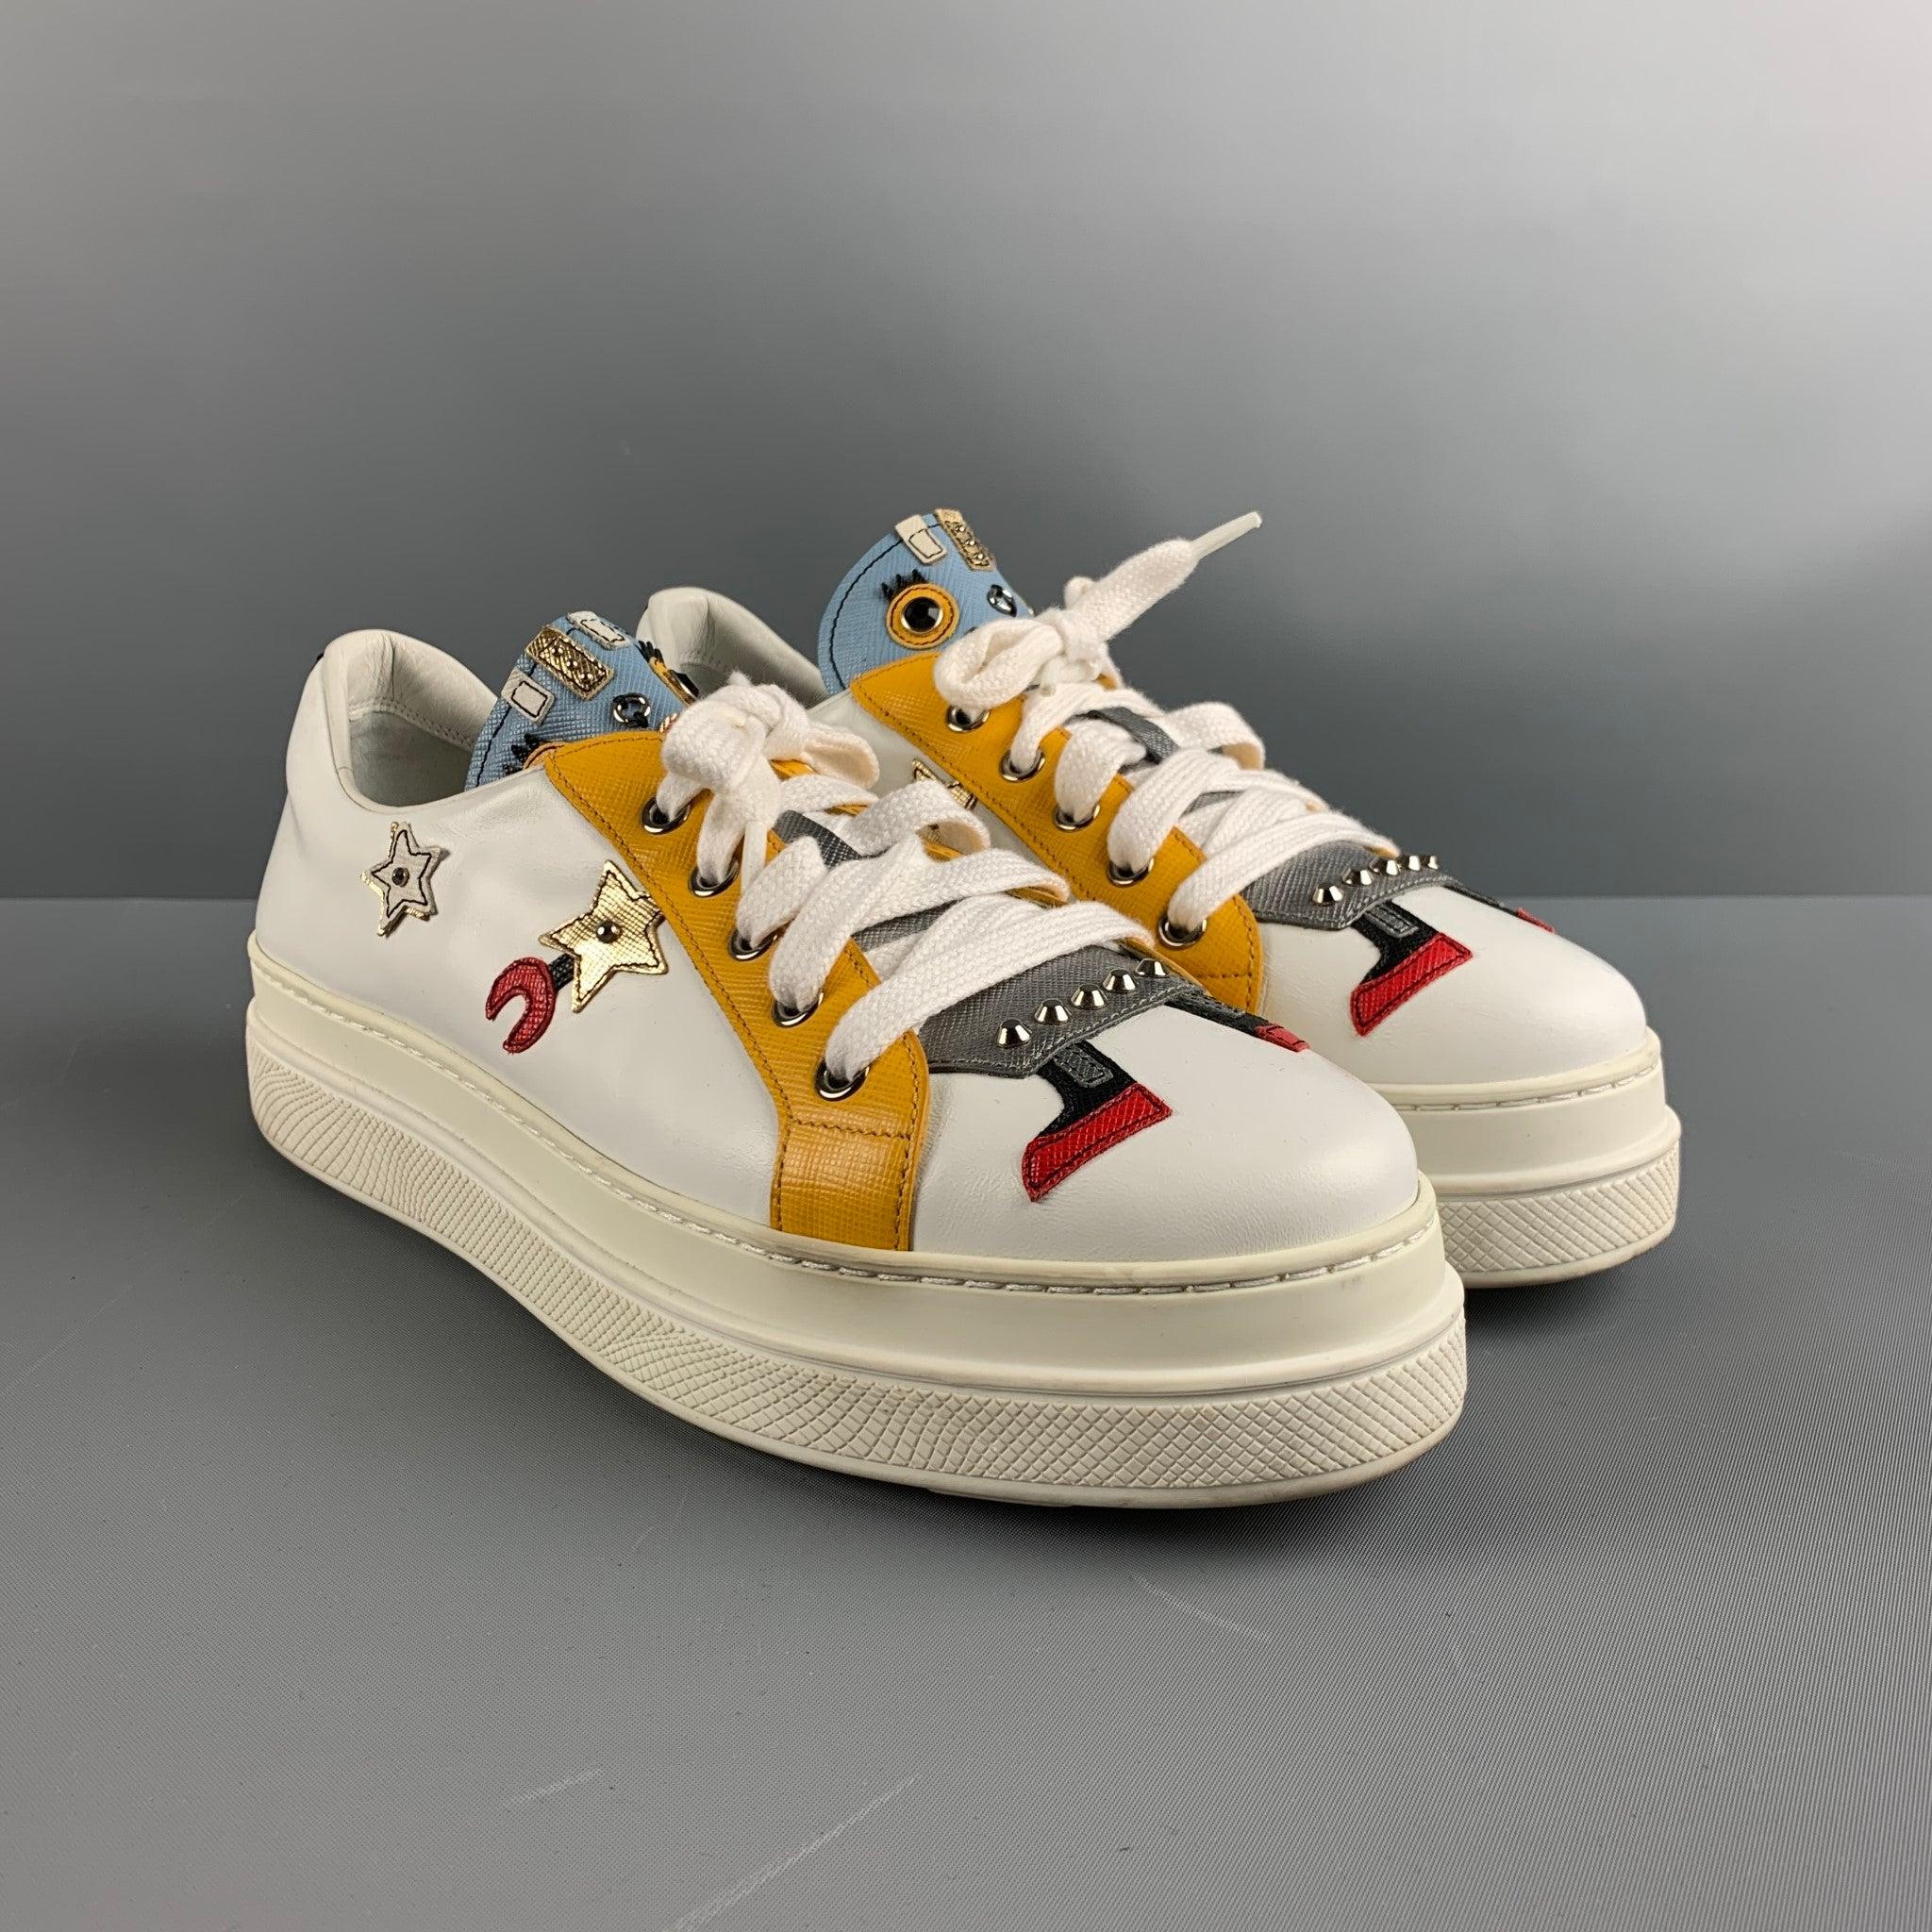 PRADA sneakers comes in a blue, yellow and white leather featuring a silver tone studded accents, robot motif, double rubber sole, and a slip on. Made in Italy.Very Good Pre- Owned Conditions. Minor signs of wear. 

Marked:   461 40Outsole: 11